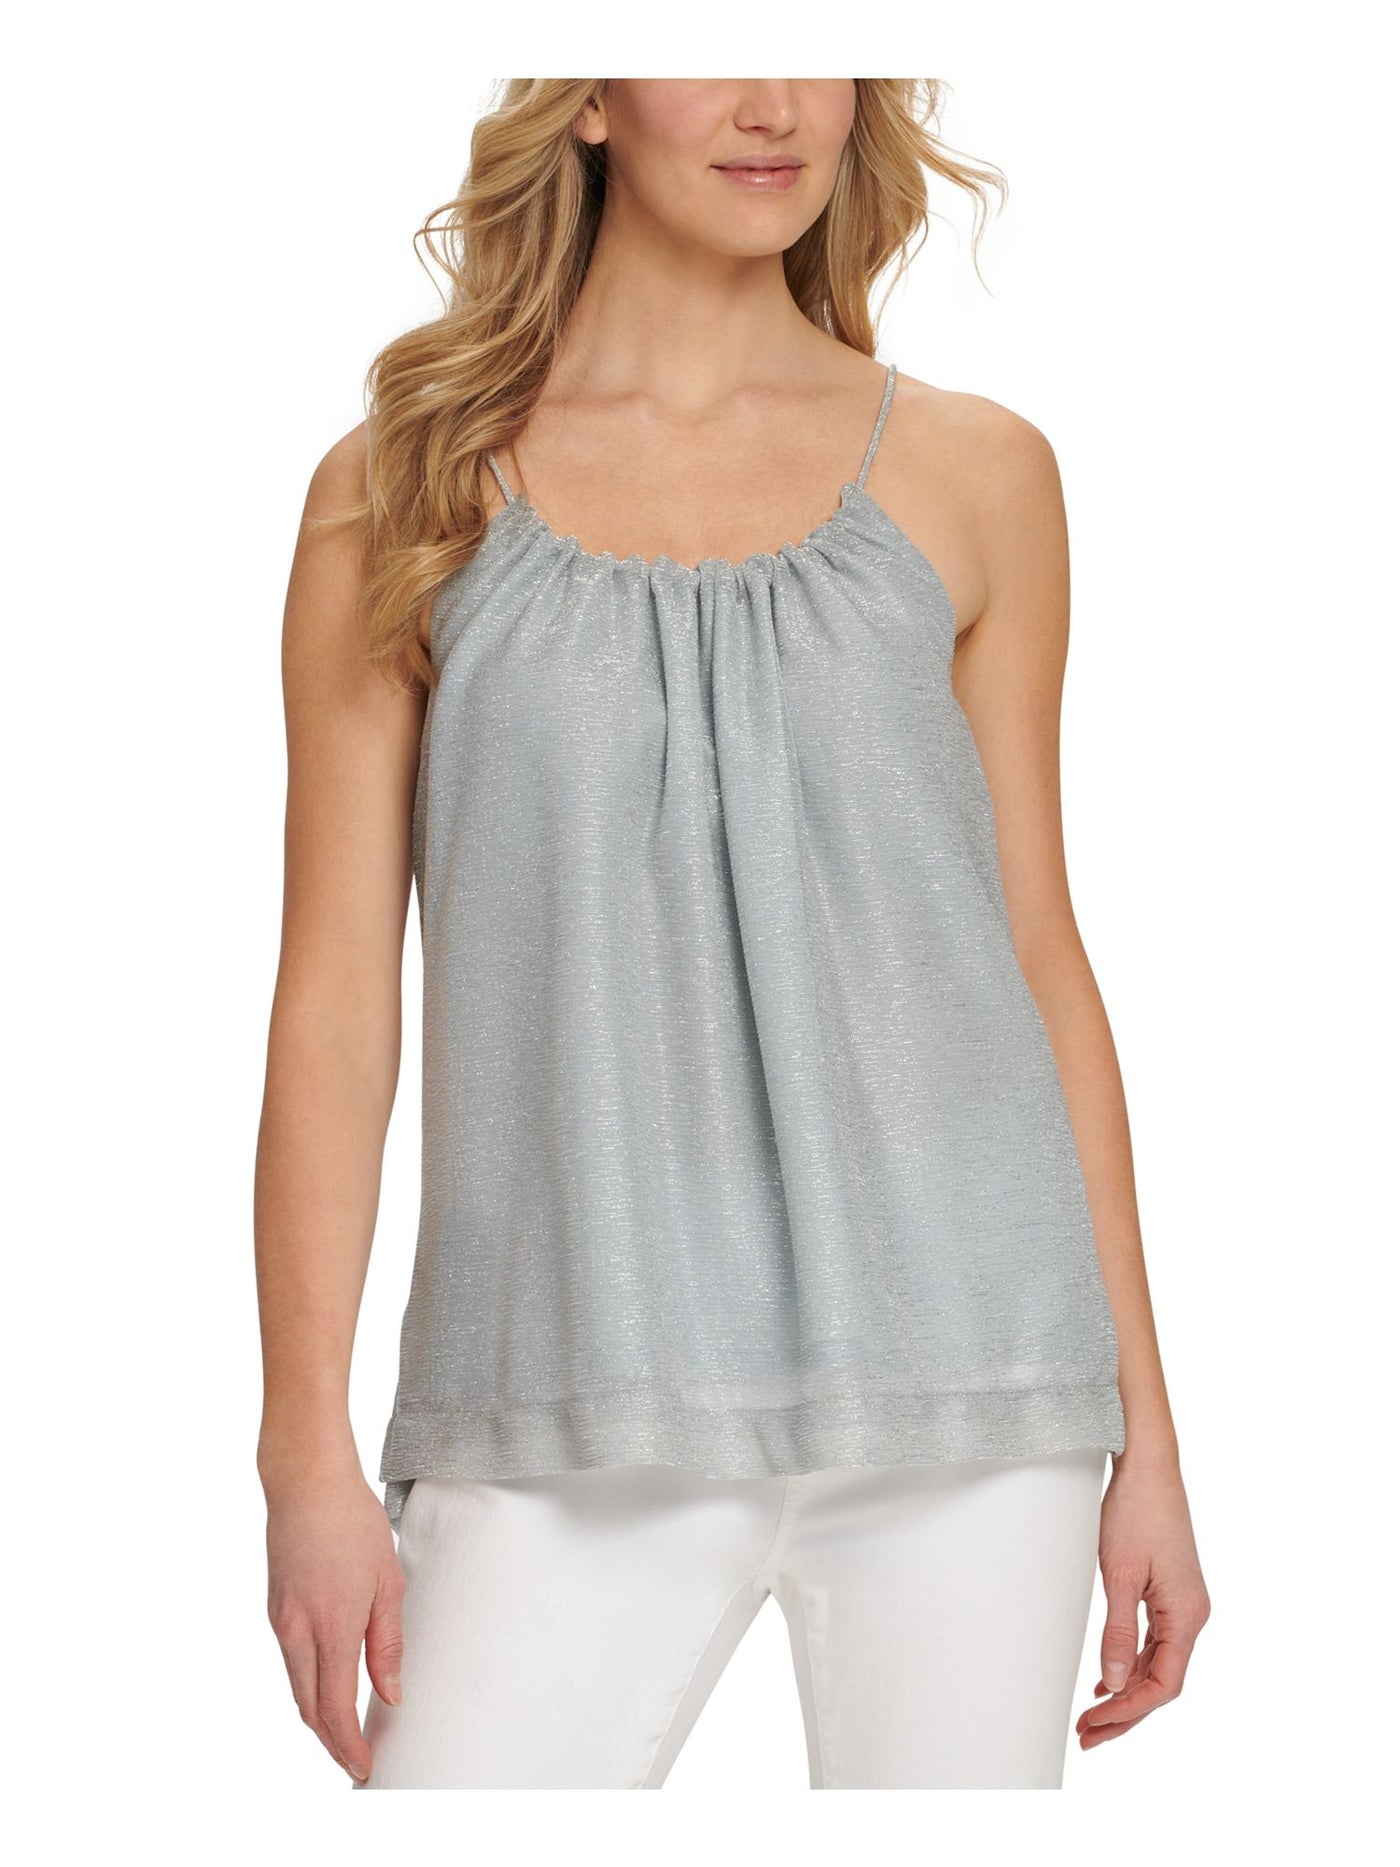 DKNY Womens Silver Textured Scoop Neck Evening Top M